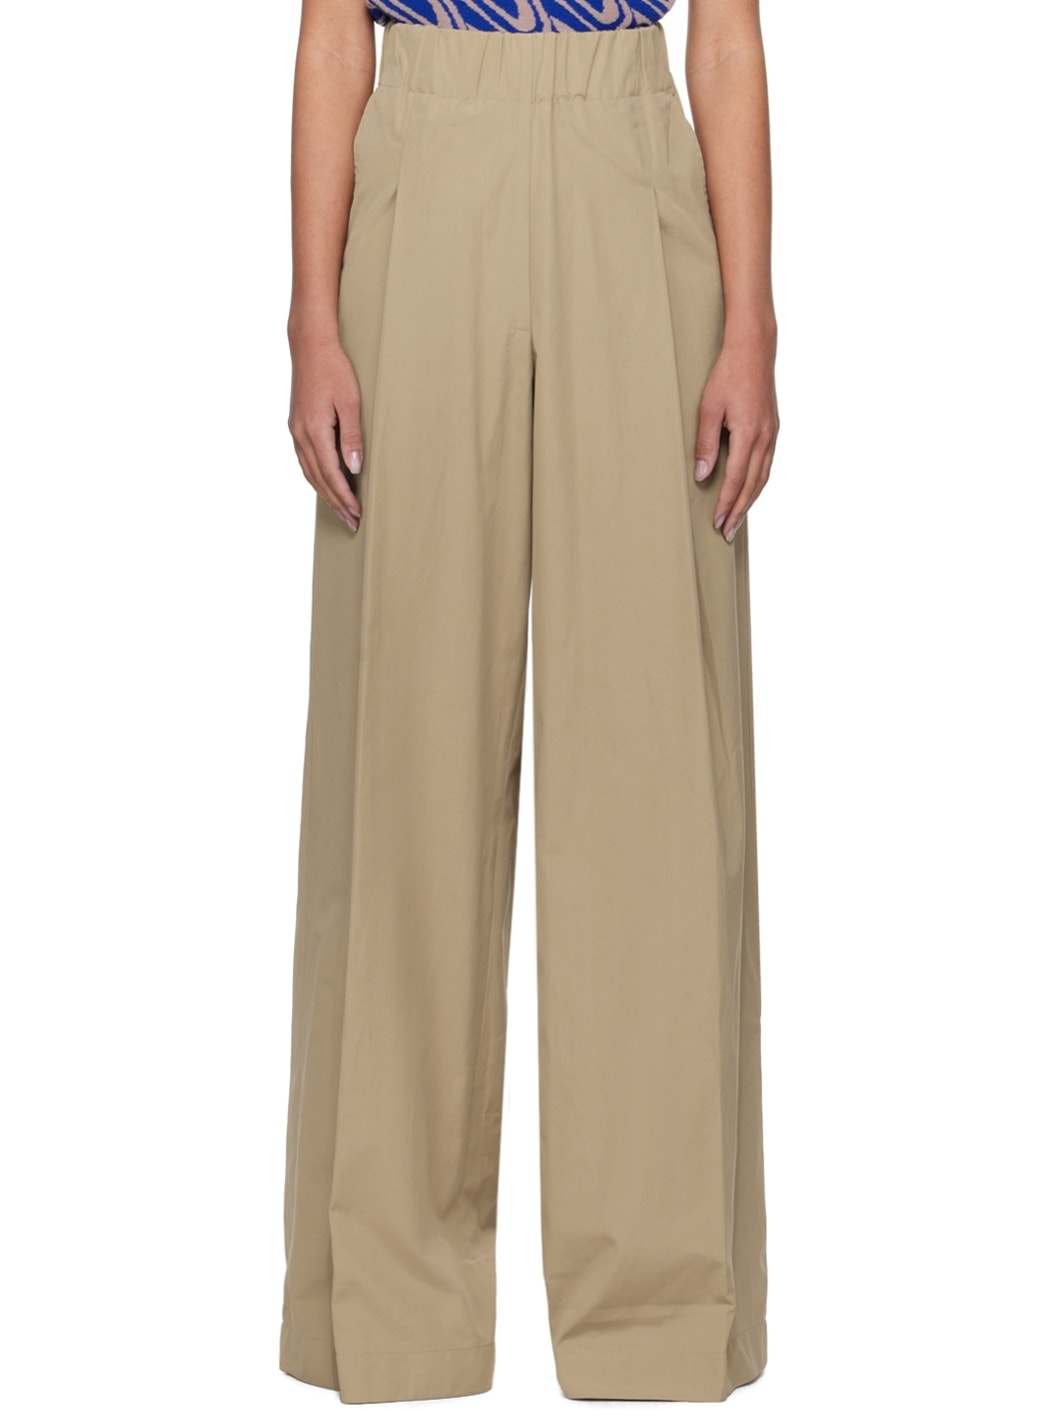 Beige Pleated Trousers - 1